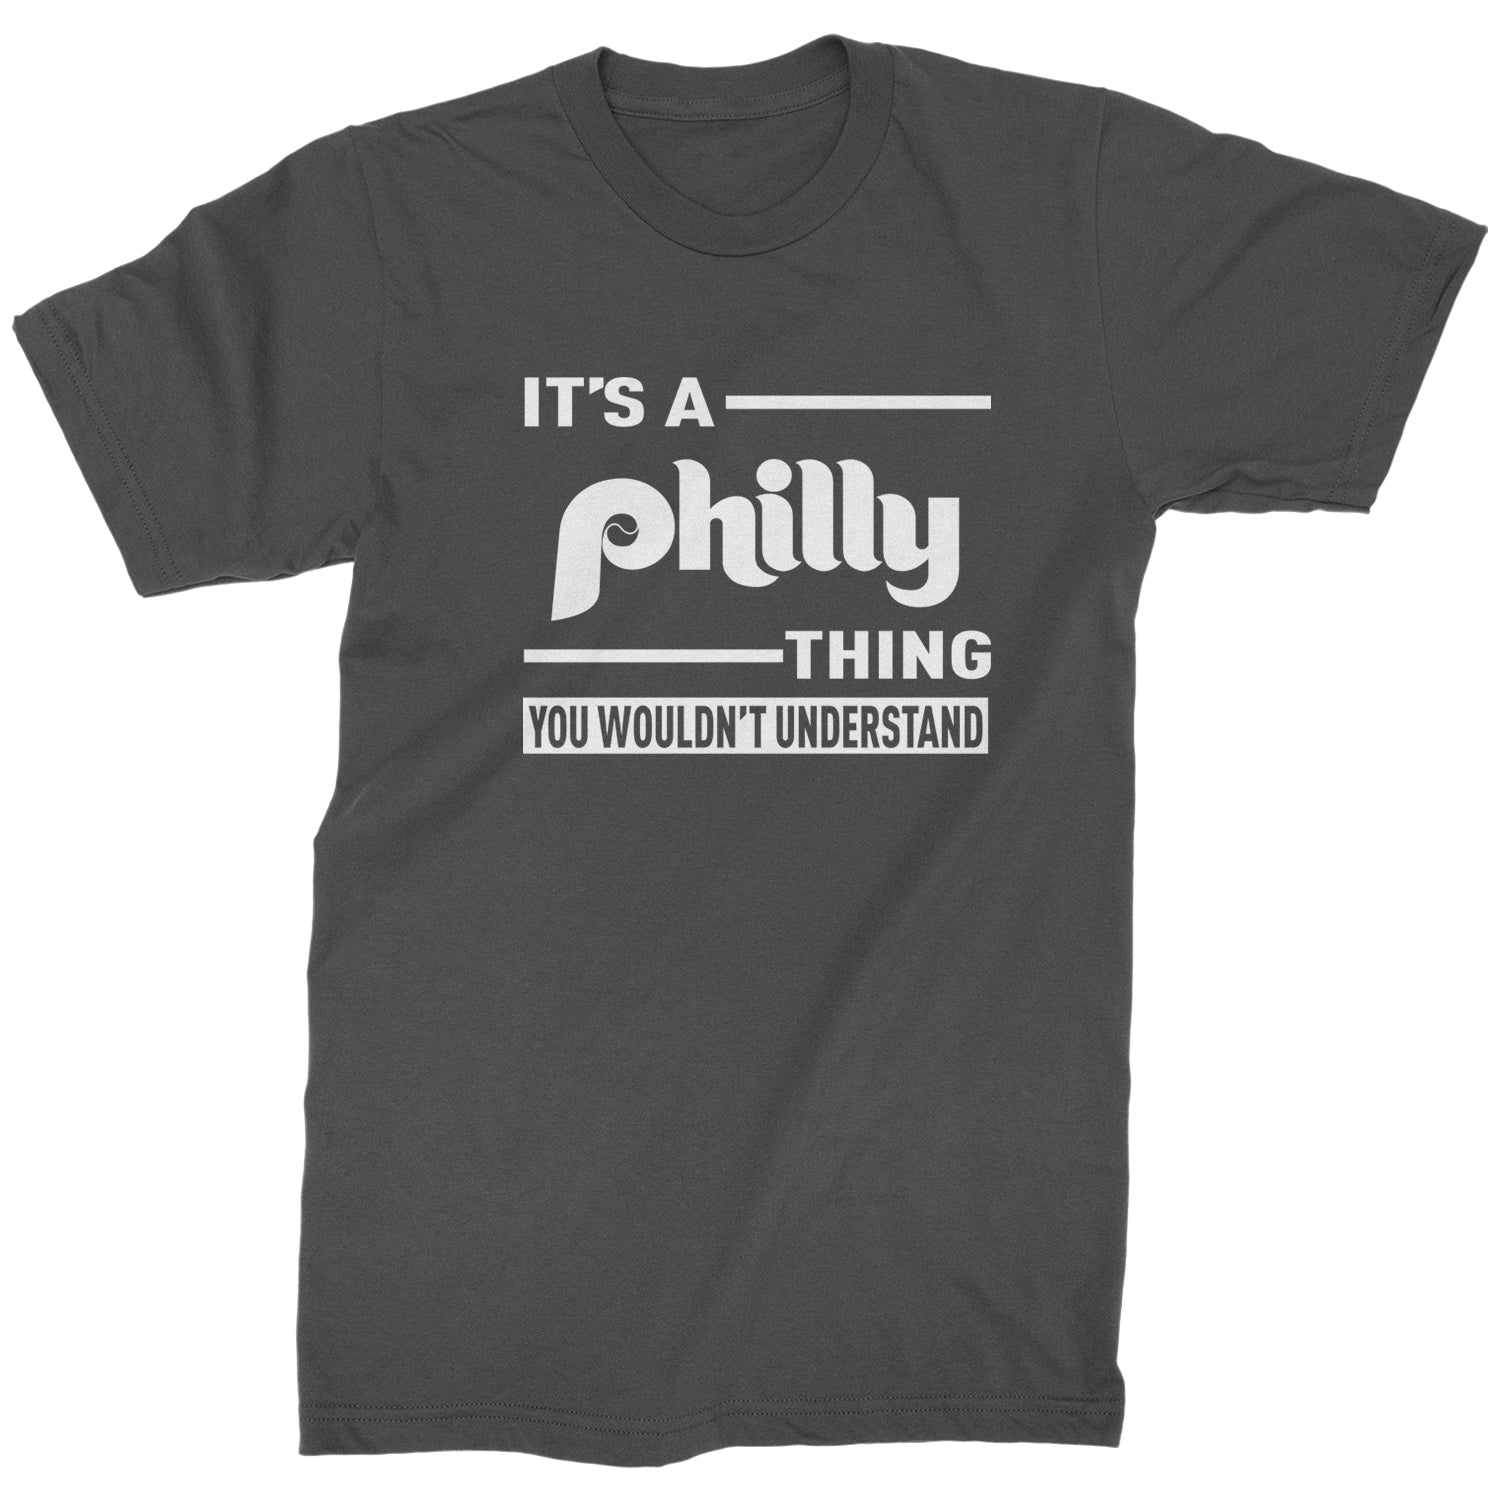 It's A Philly Thing, You Wouldn't Understand Mens T-shirt baseball, filly, football, jawn, morgan, Philadelphia, philli by Expression Tees